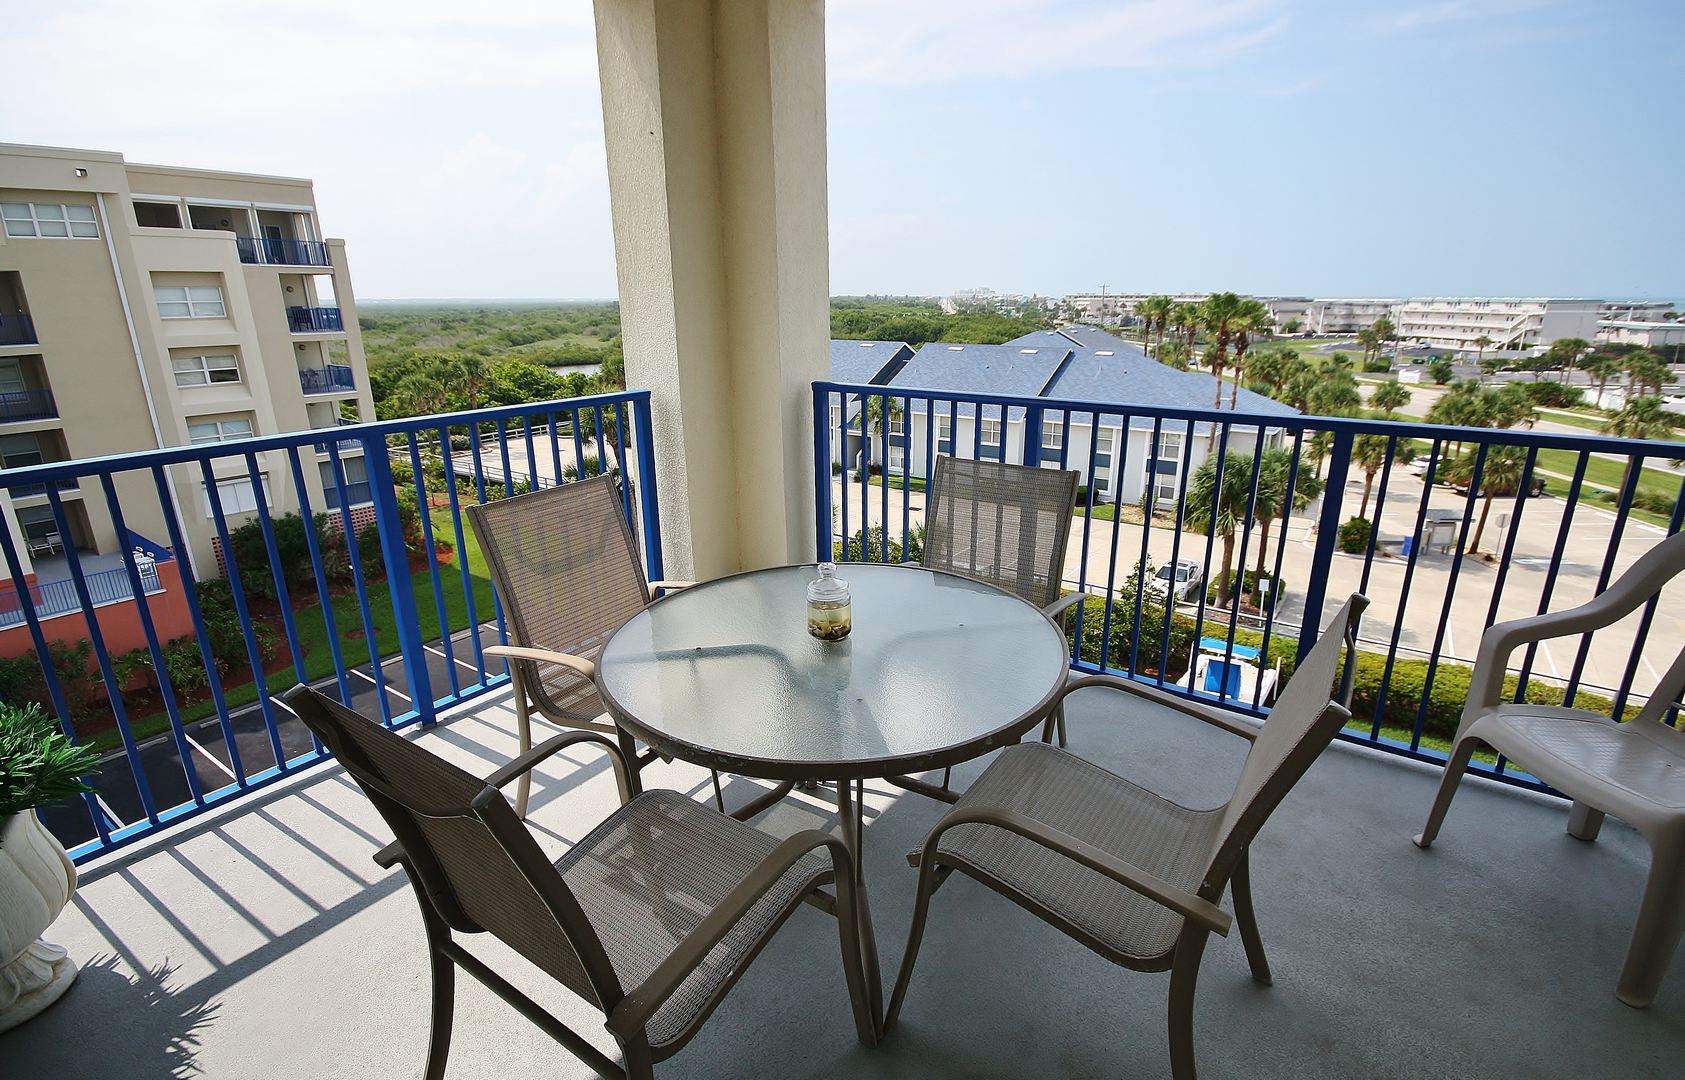 Dine on this balcony with a great view